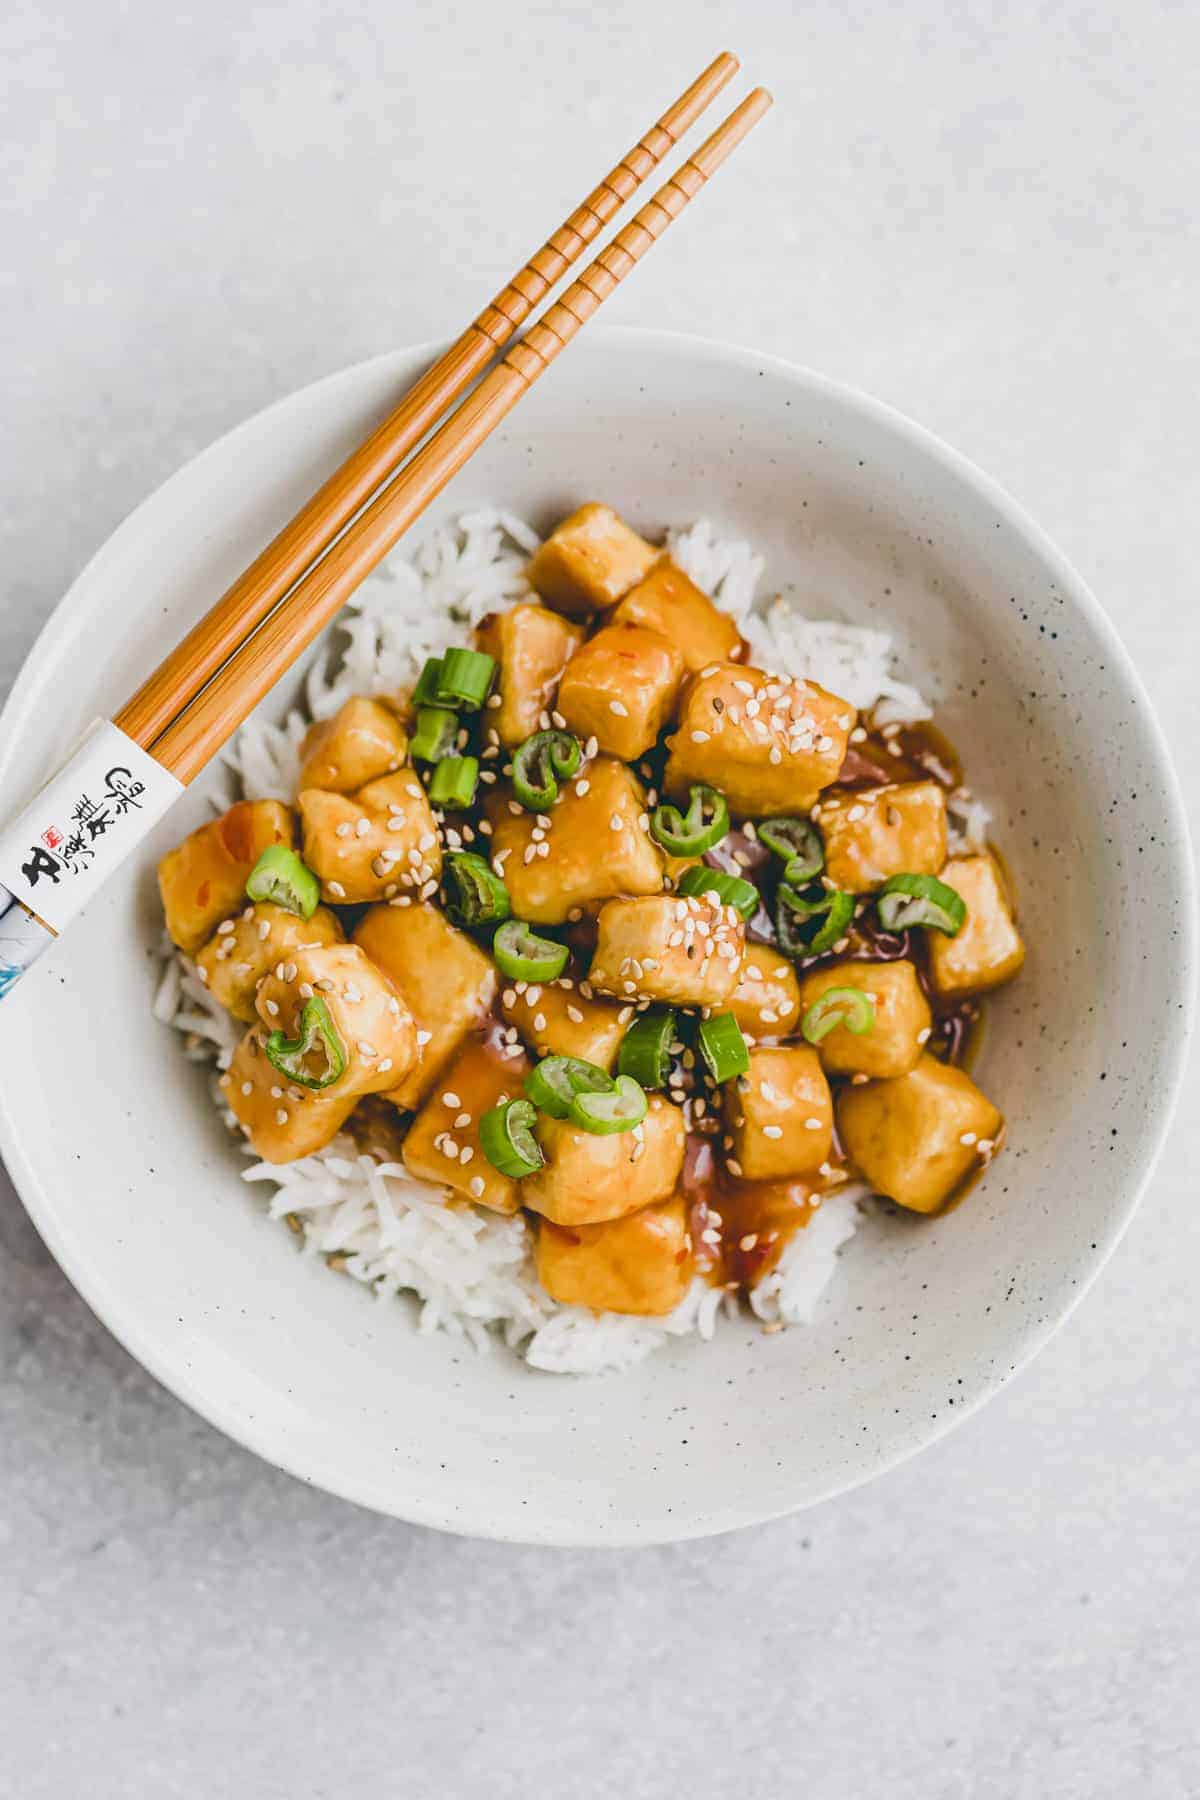 Tofu Cubes on white rice in a neutral coloured bowl.